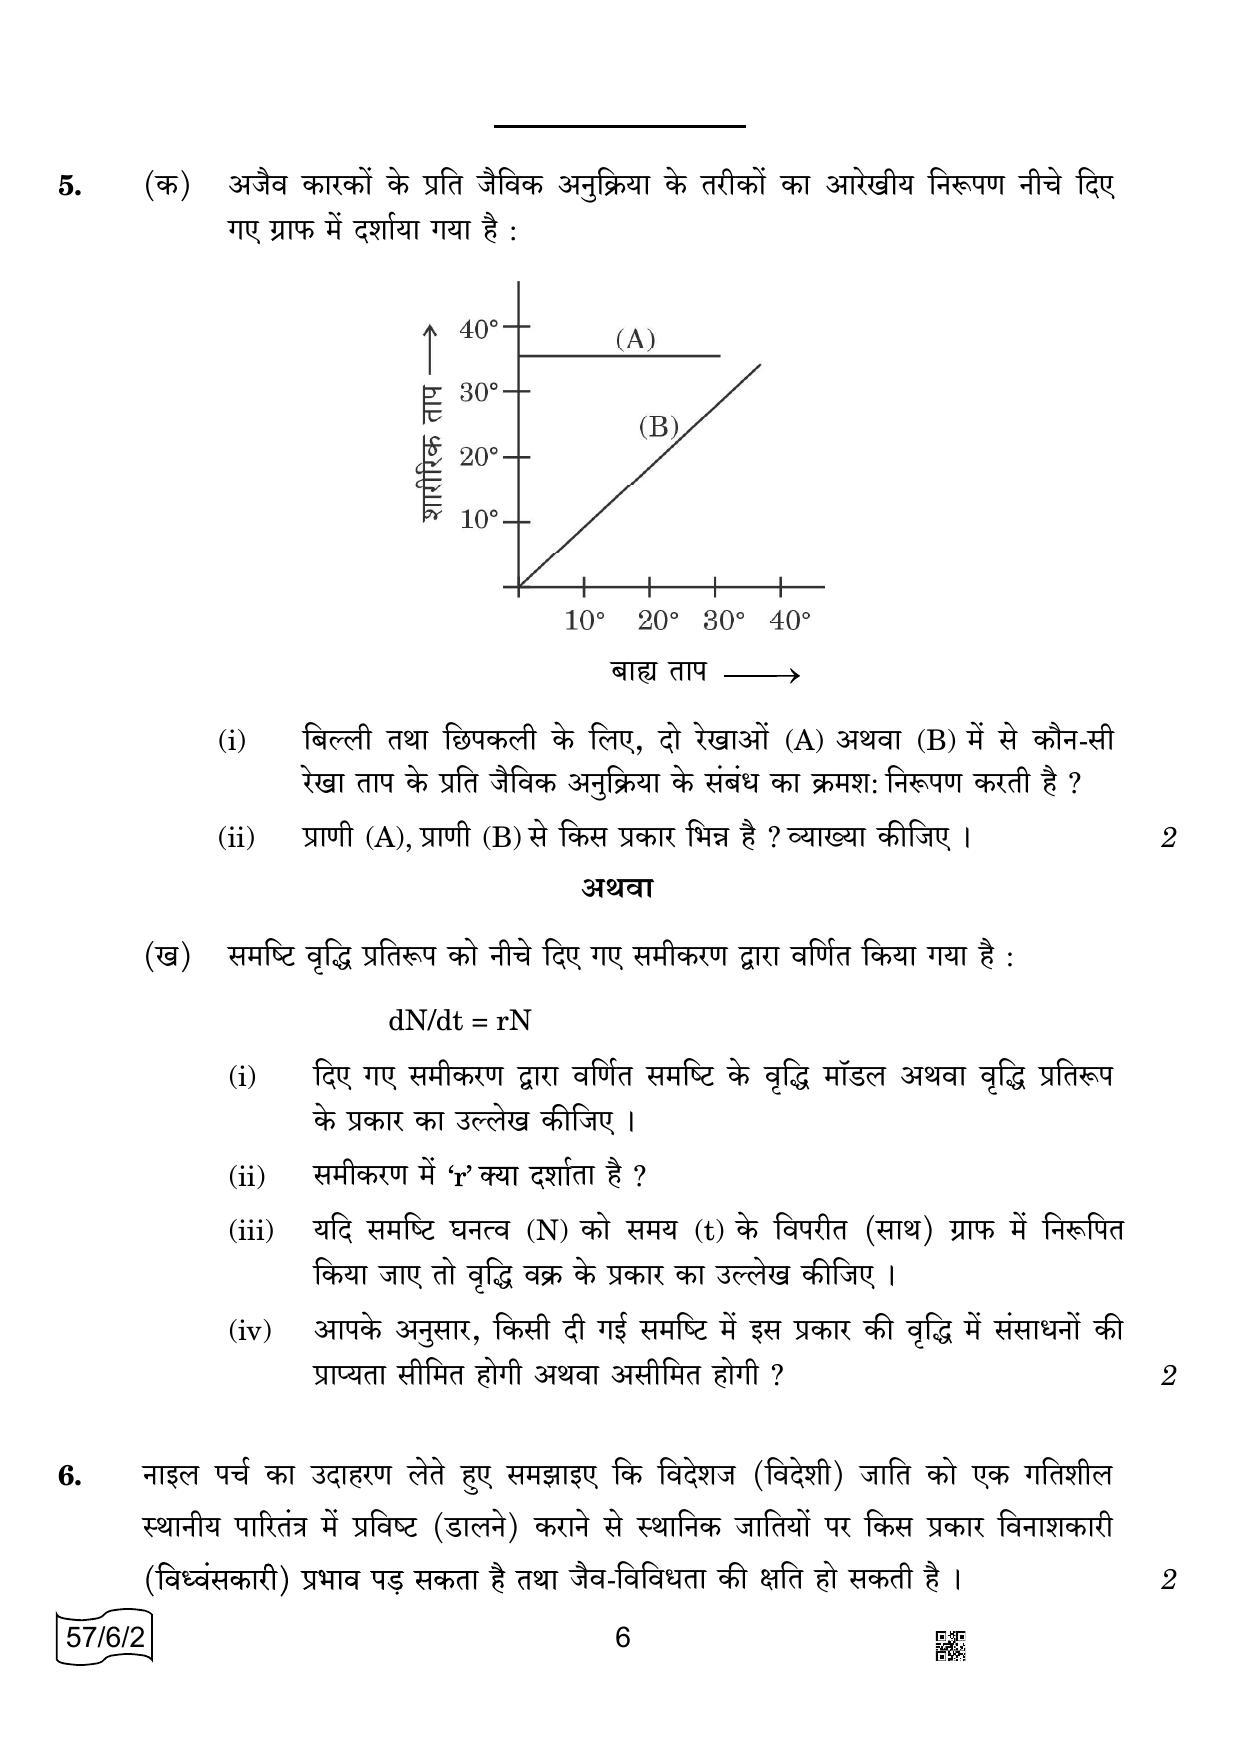 CBSE Class 12 57-6-2 BIOLOGY 2022 Compartment Question Paper - Page 6